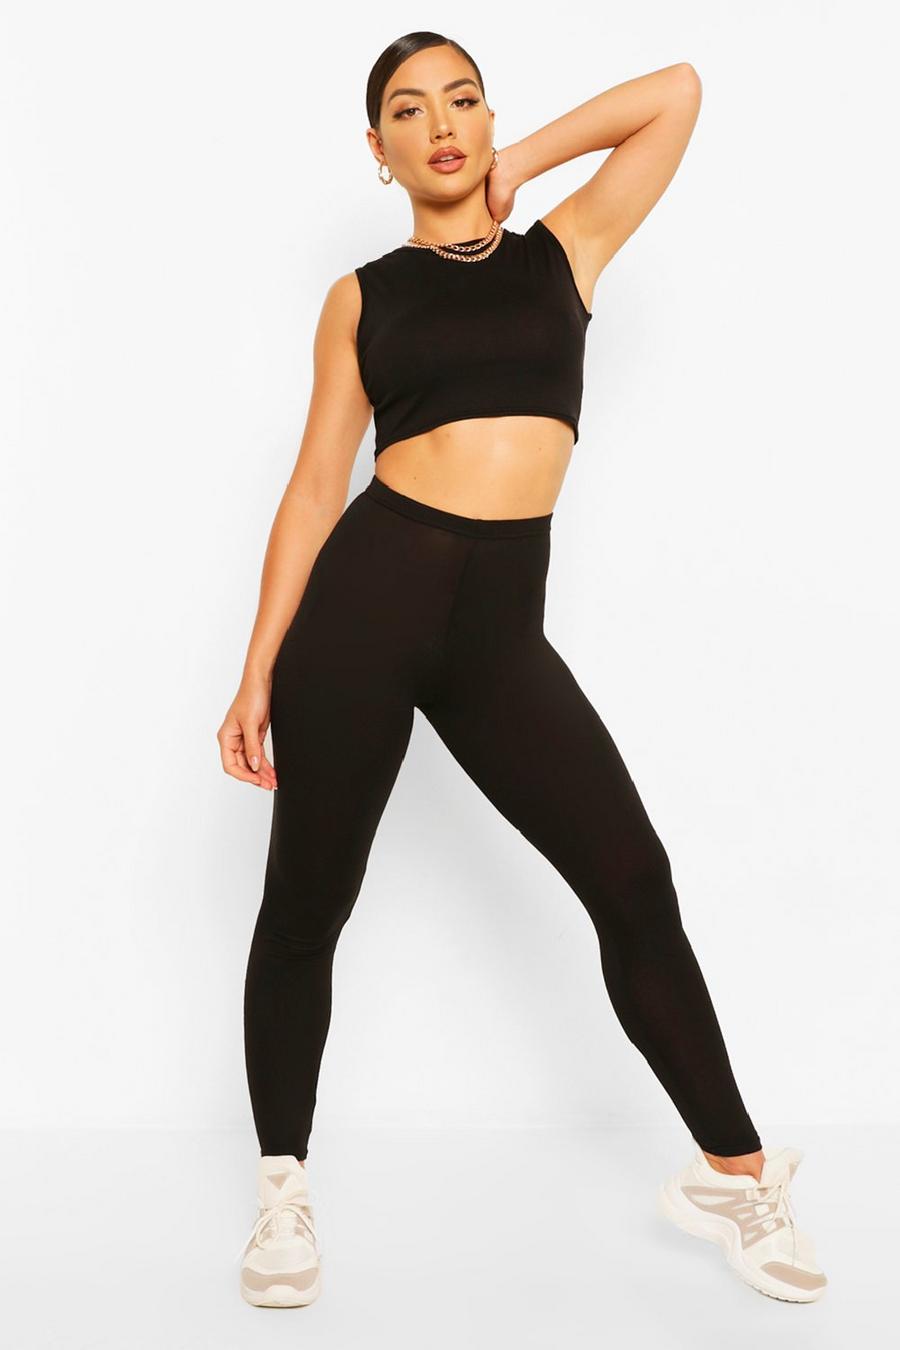 Women's Sleeveless Crop Top and Legging Co-ord Set